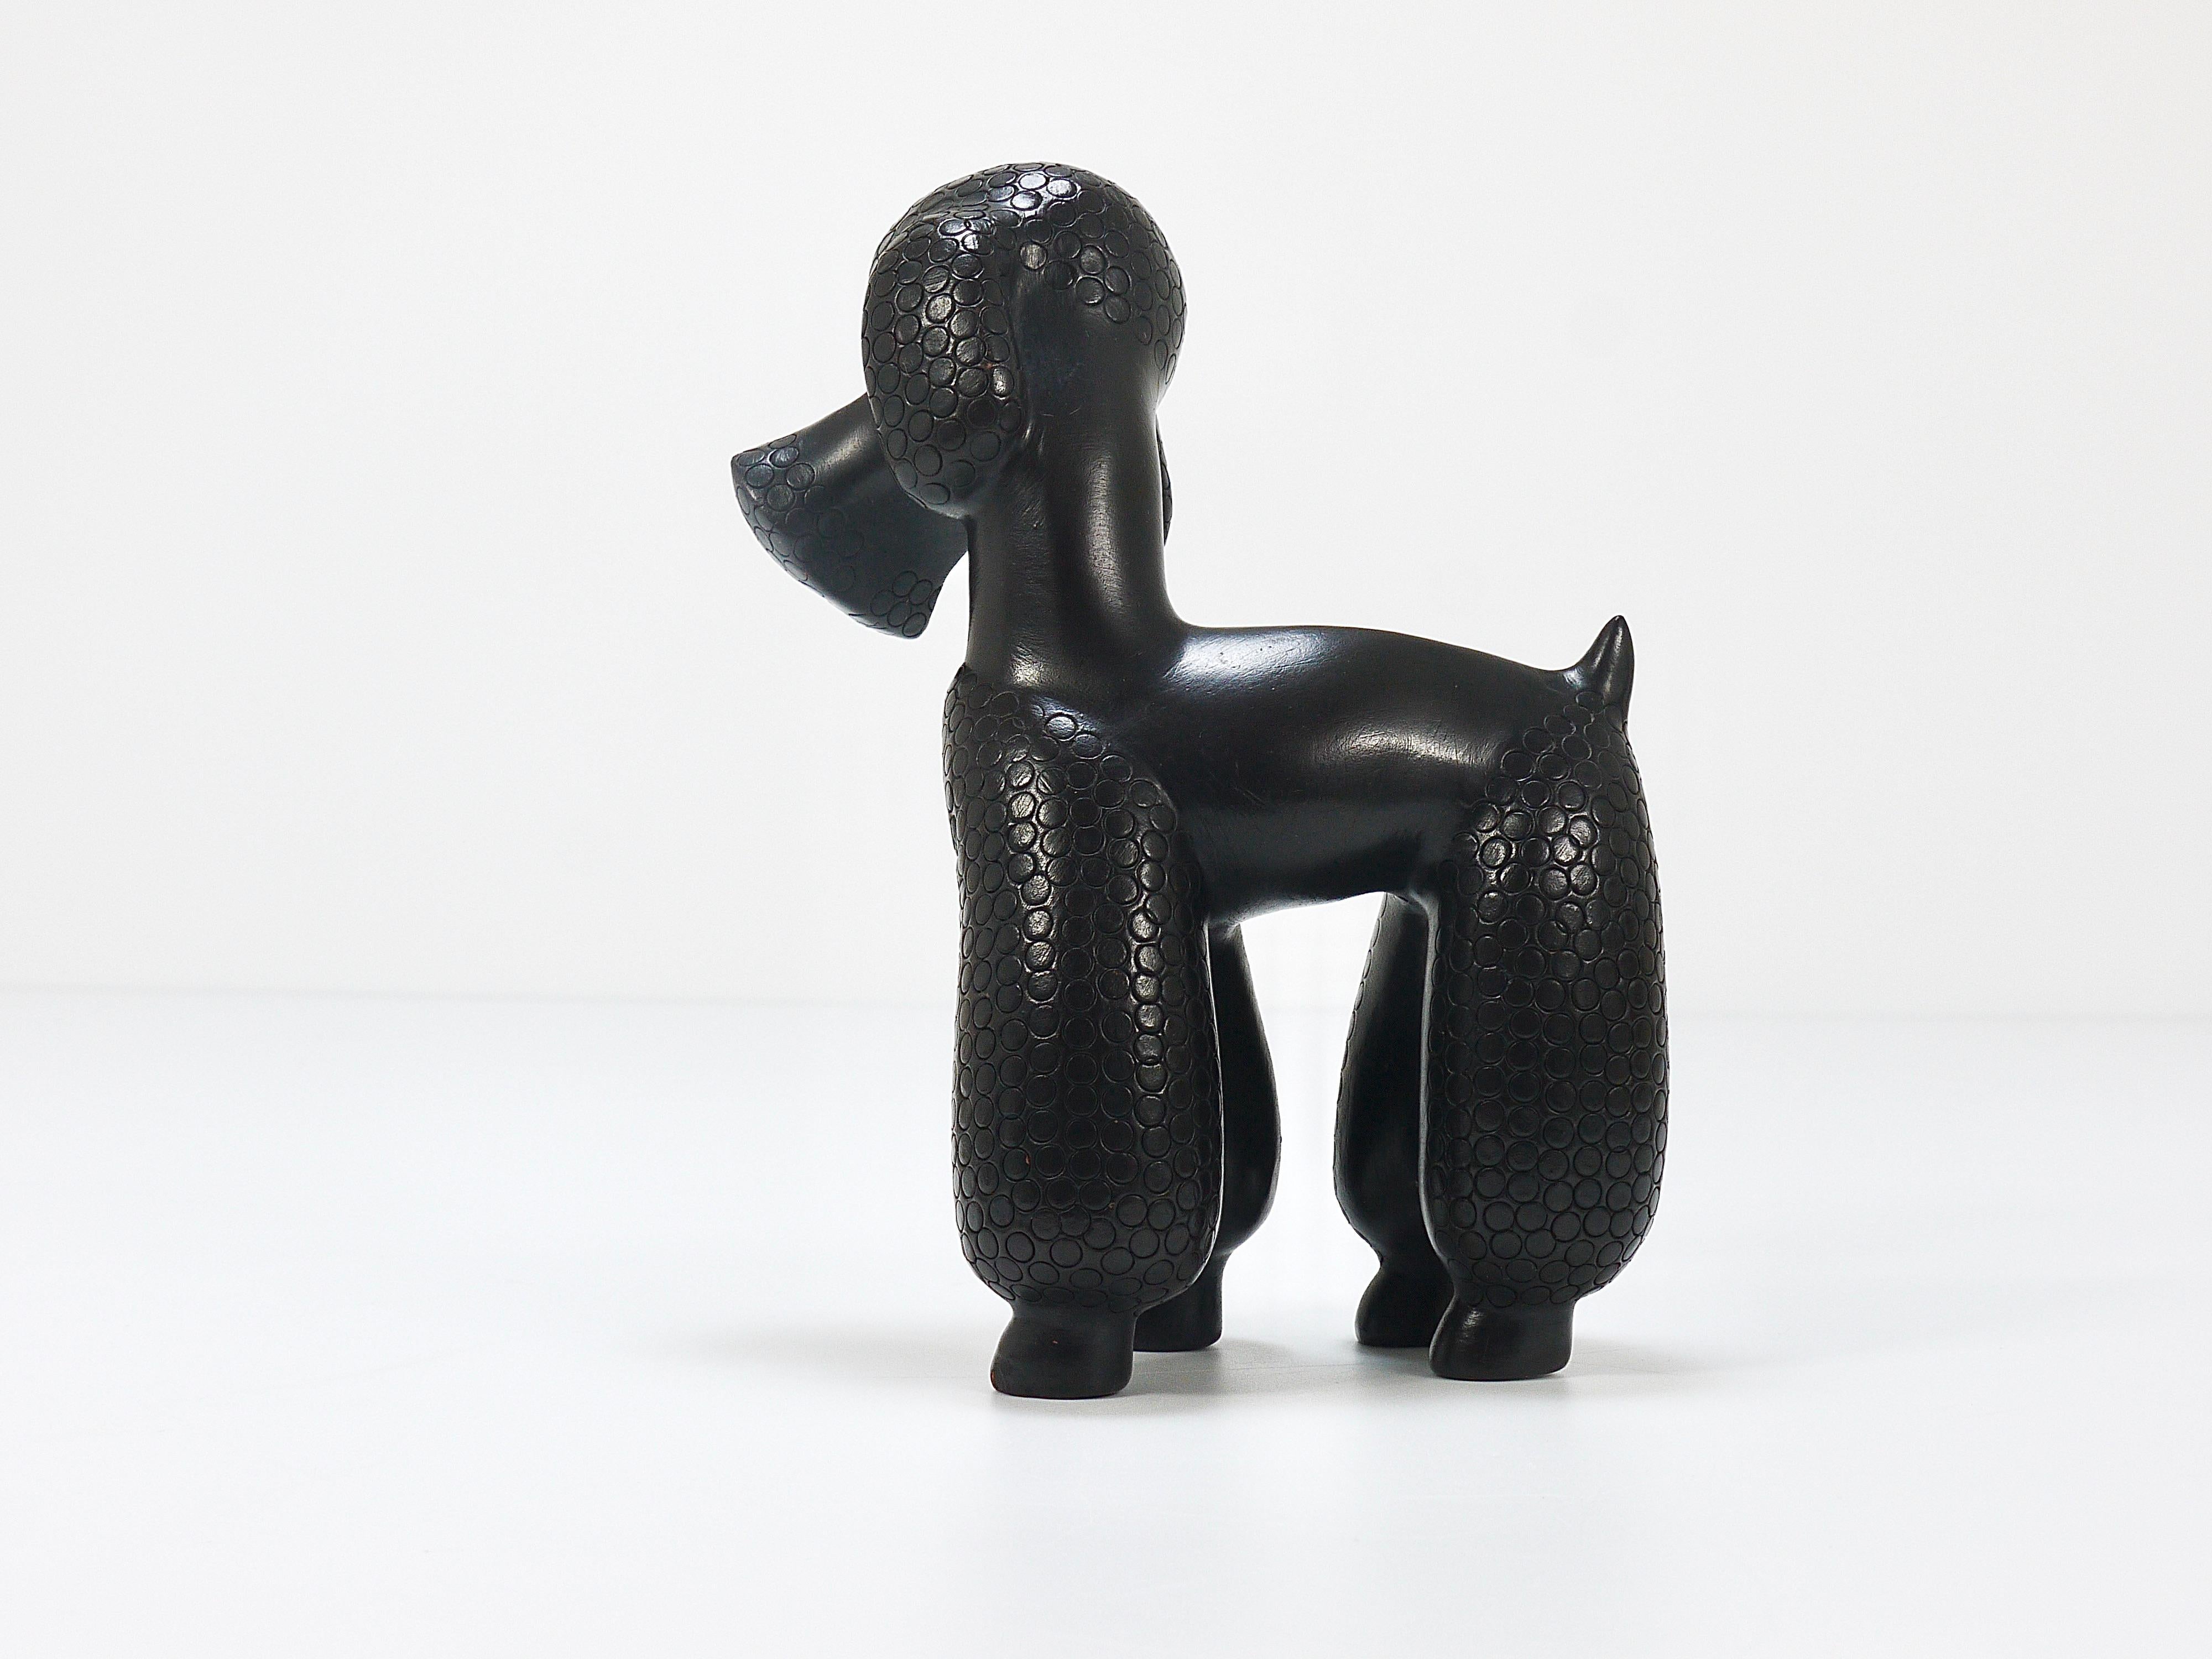 20th Century Charming Dog Poodle Sculpture Figurine by Leopold Anzengruber, Austria, 1950s